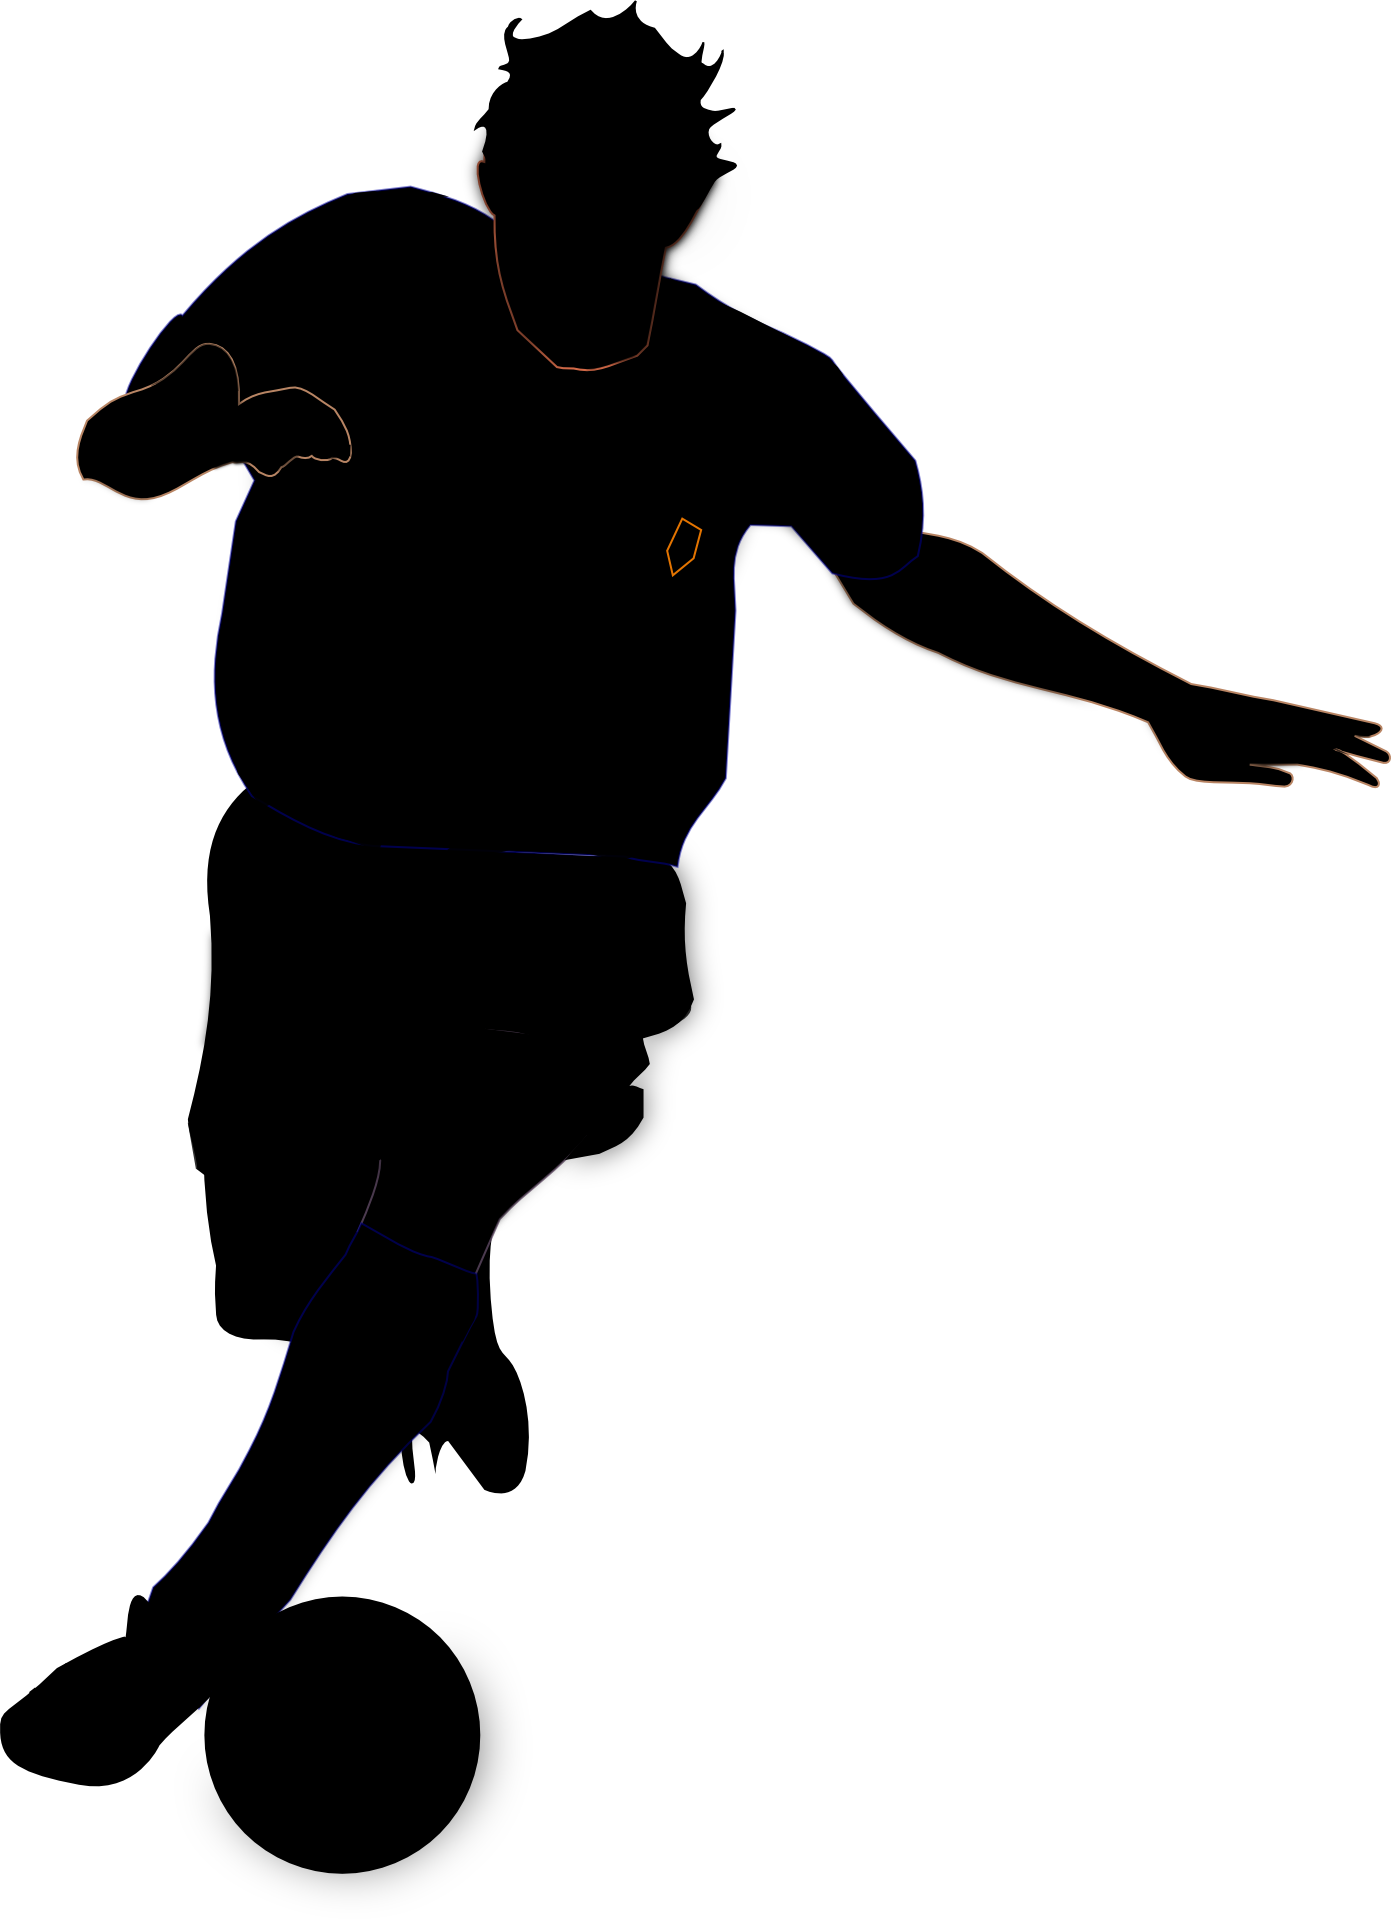 Football Silhouette - footballer png download - 1391*1920 - Free ...